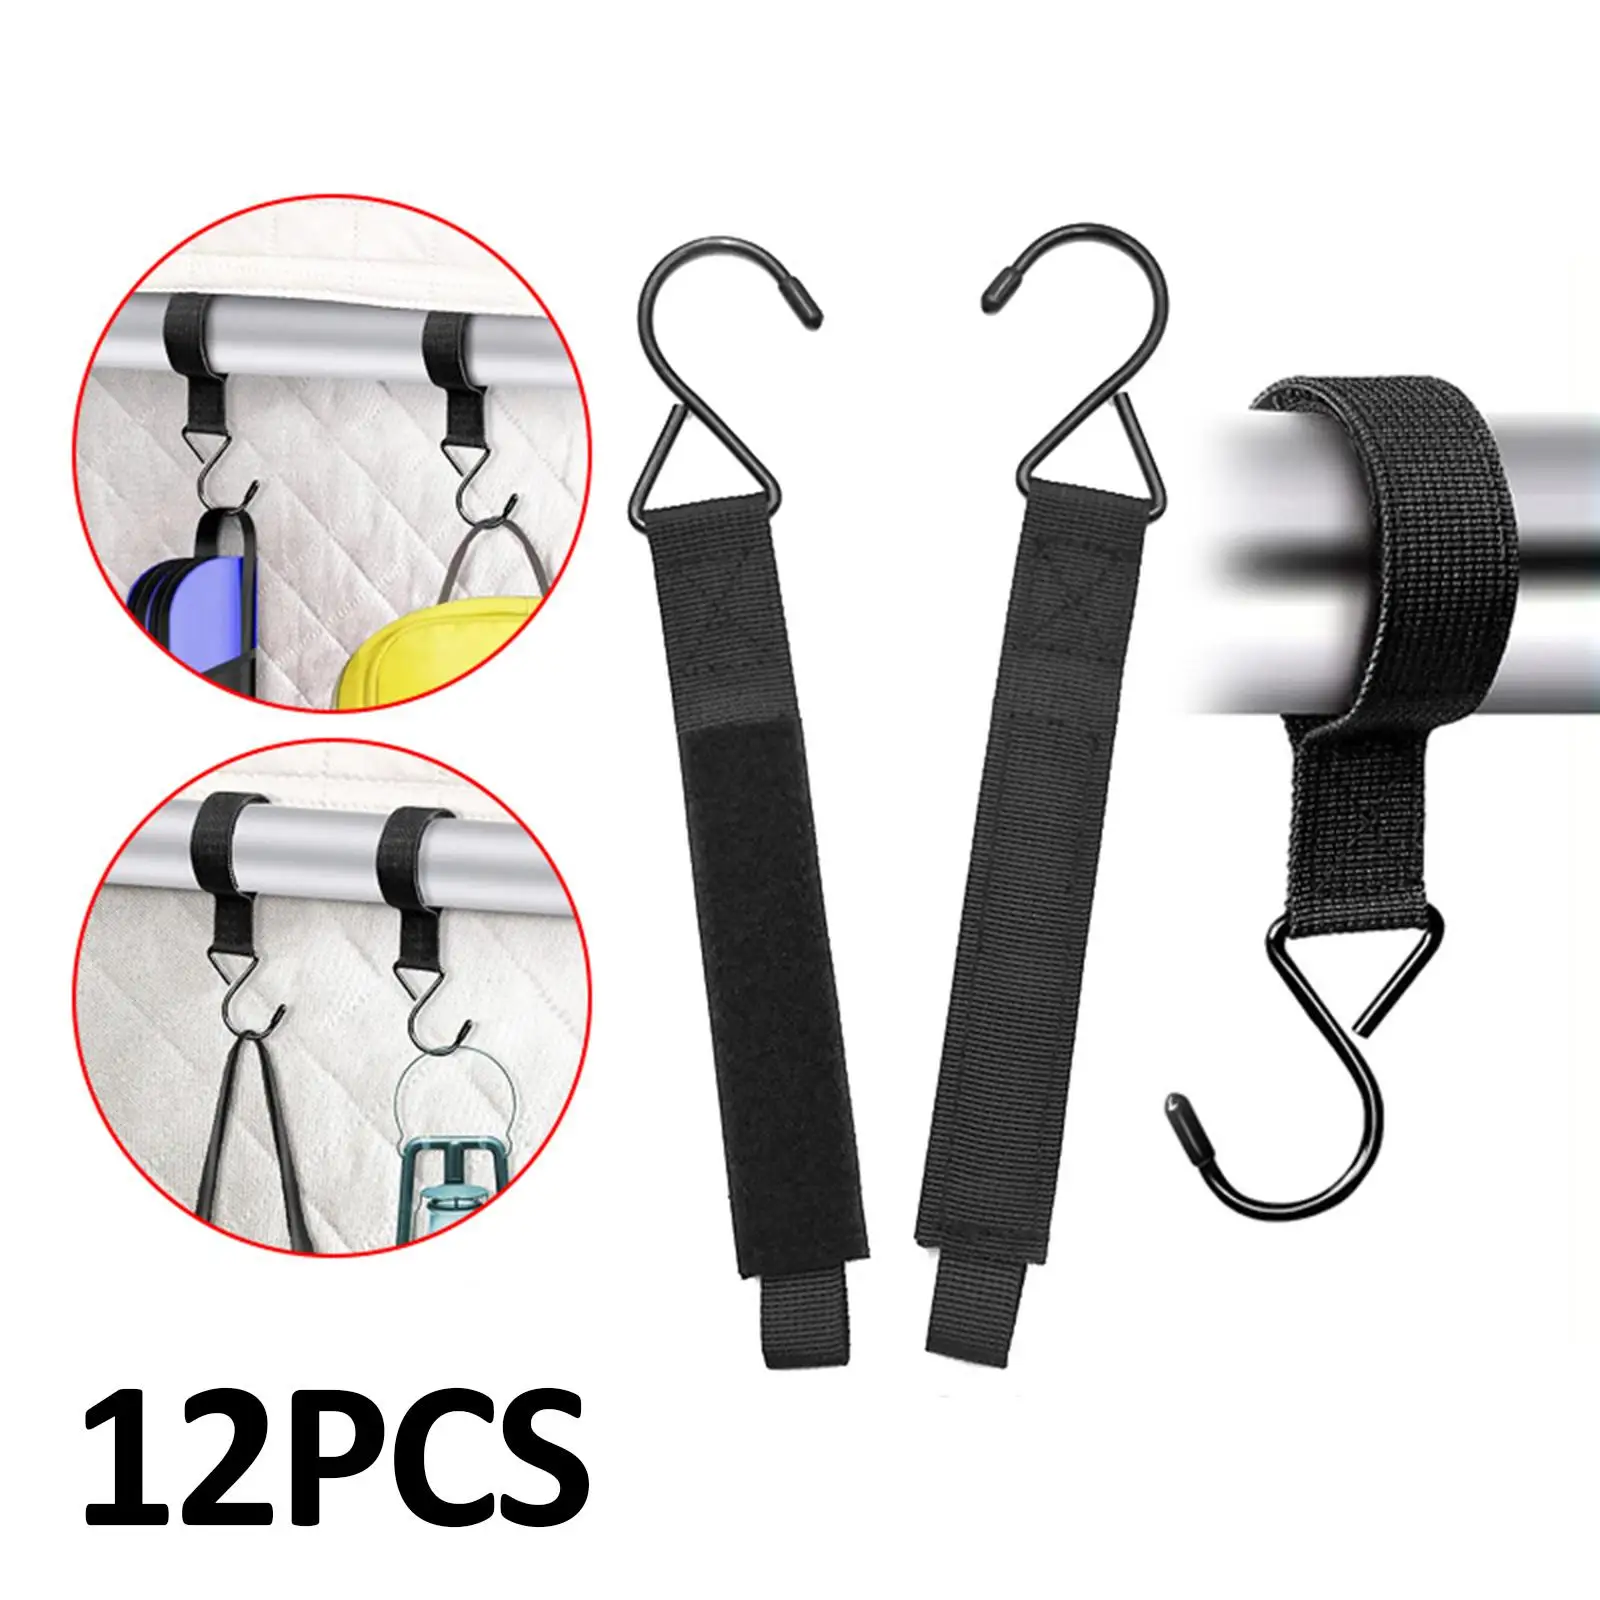 12x Ice Fishing Shelter Hooks Camping Tent Hooks Heavy Duty Durable Accessories Hanger Hanging Light for Bag Clothes Outdoor